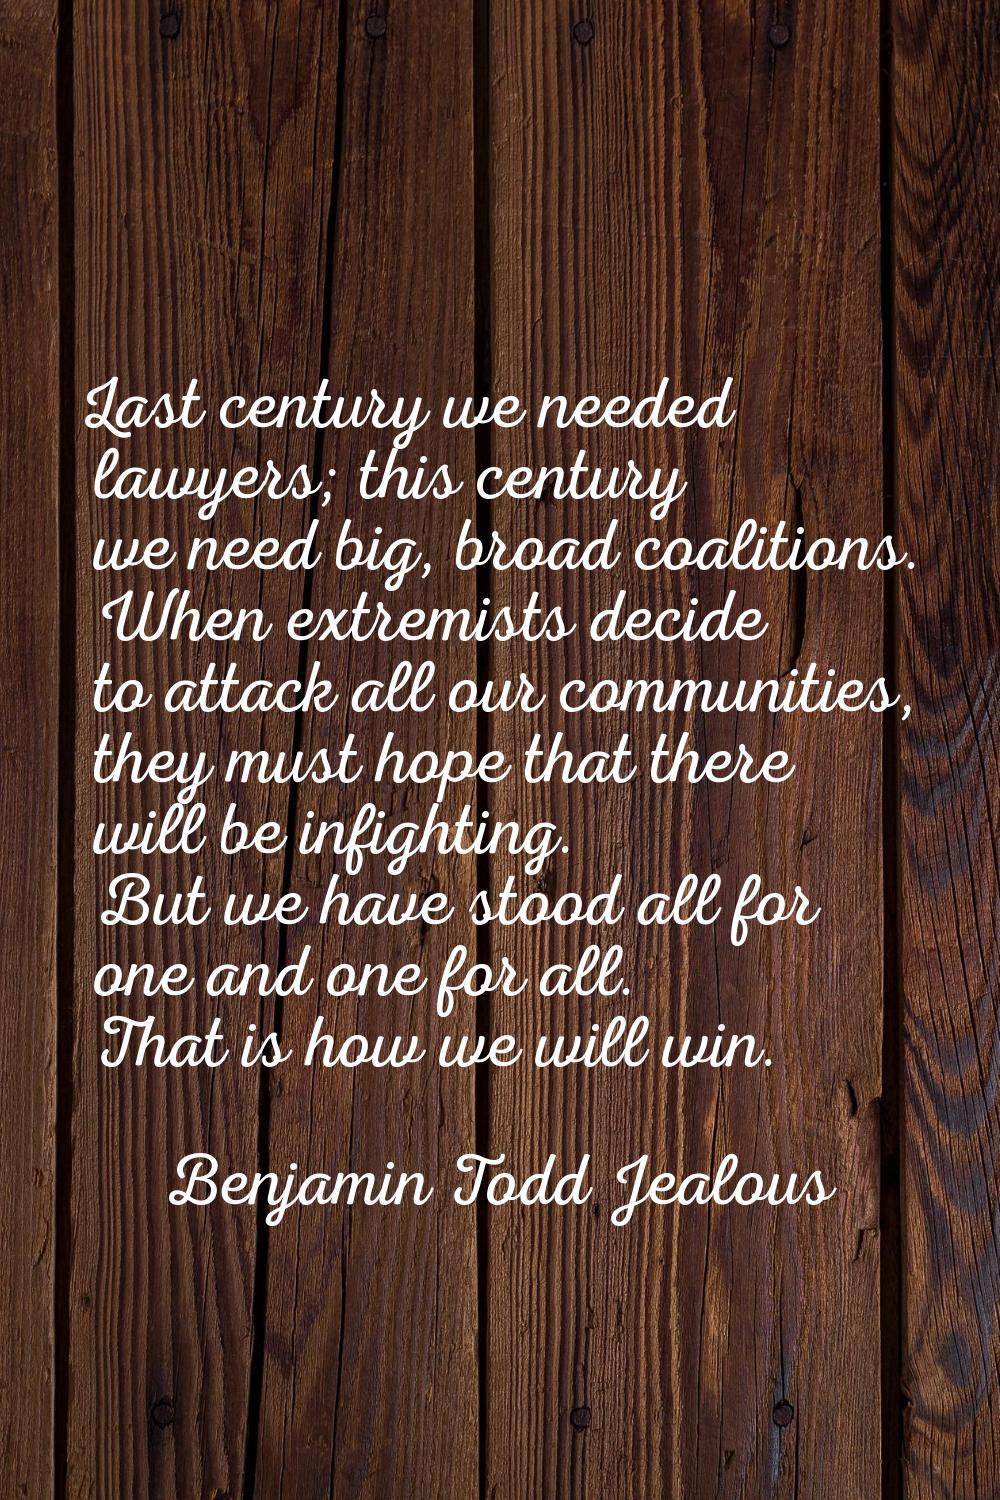 Last century we needed lawyers; this century we need big, broad coalitions. When extremists decide 